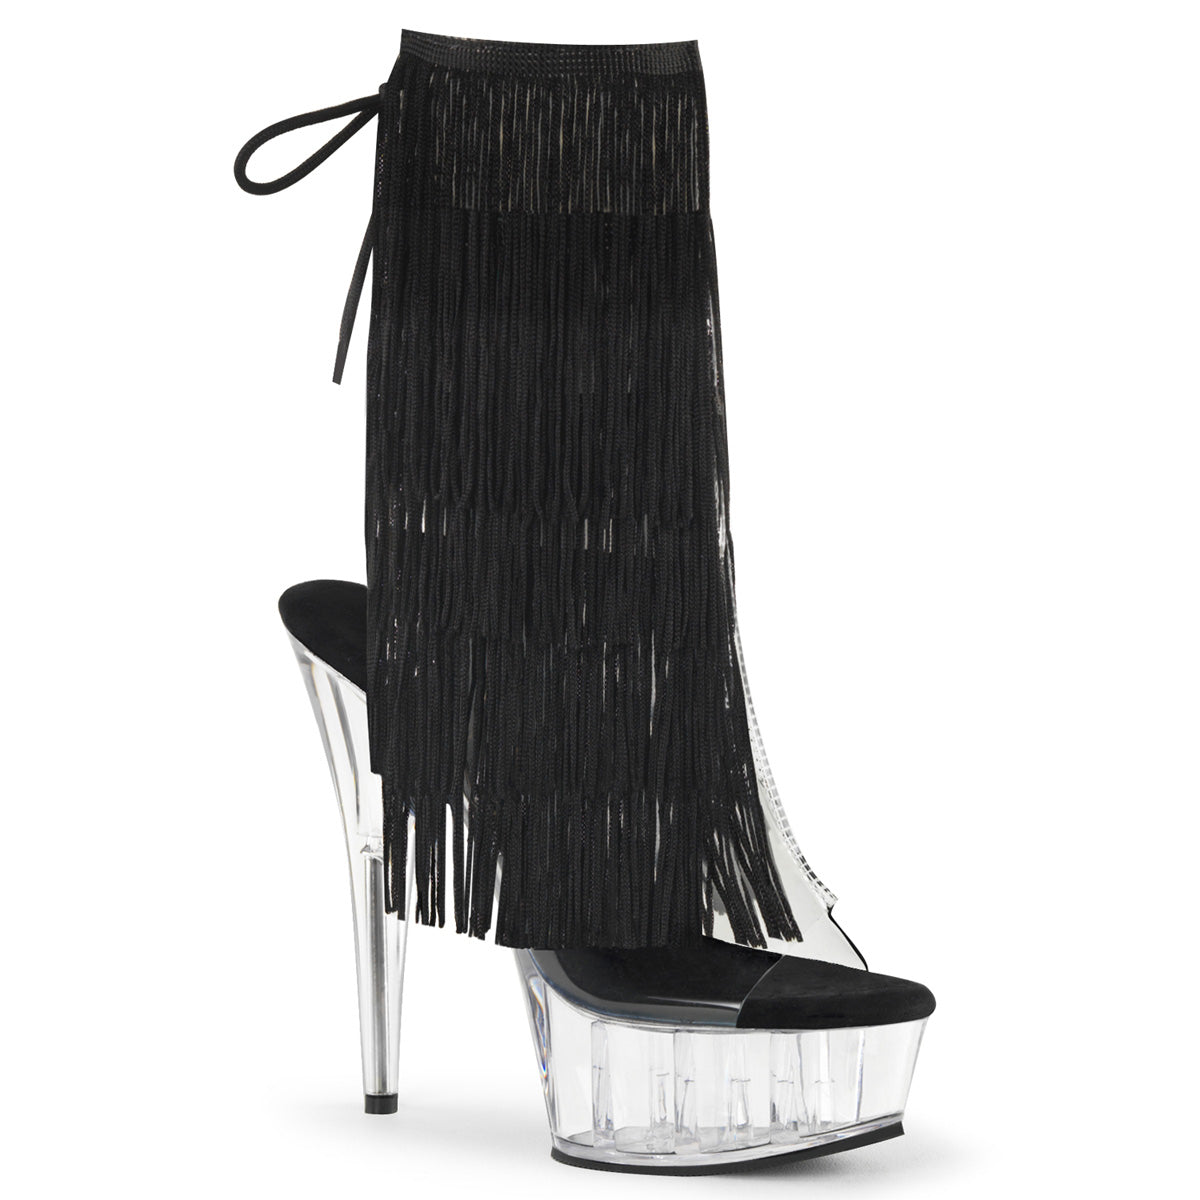 DELIGHT-1017TF 6" Heel Clear Black Pole Dancing Platforms-Pleaser- Sexy Shoes